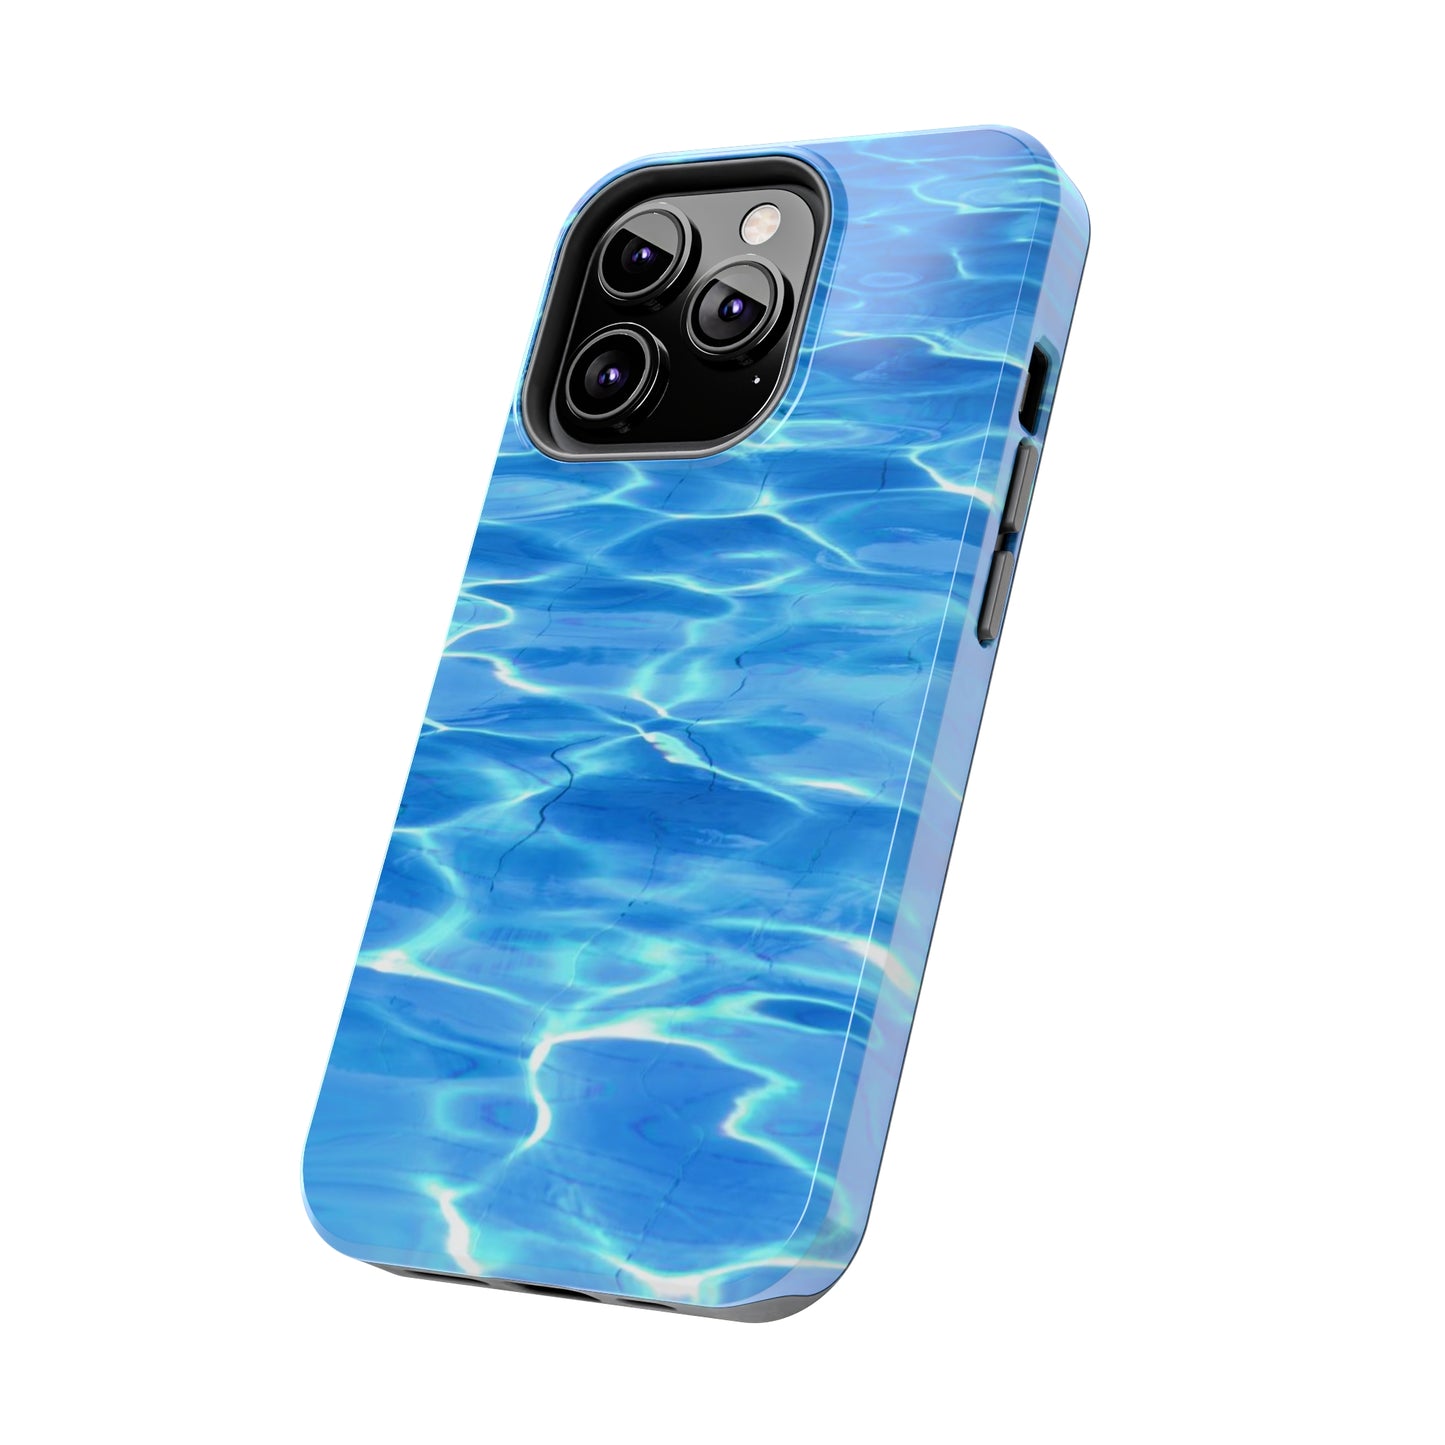 Pool Time Only / iPhone Case